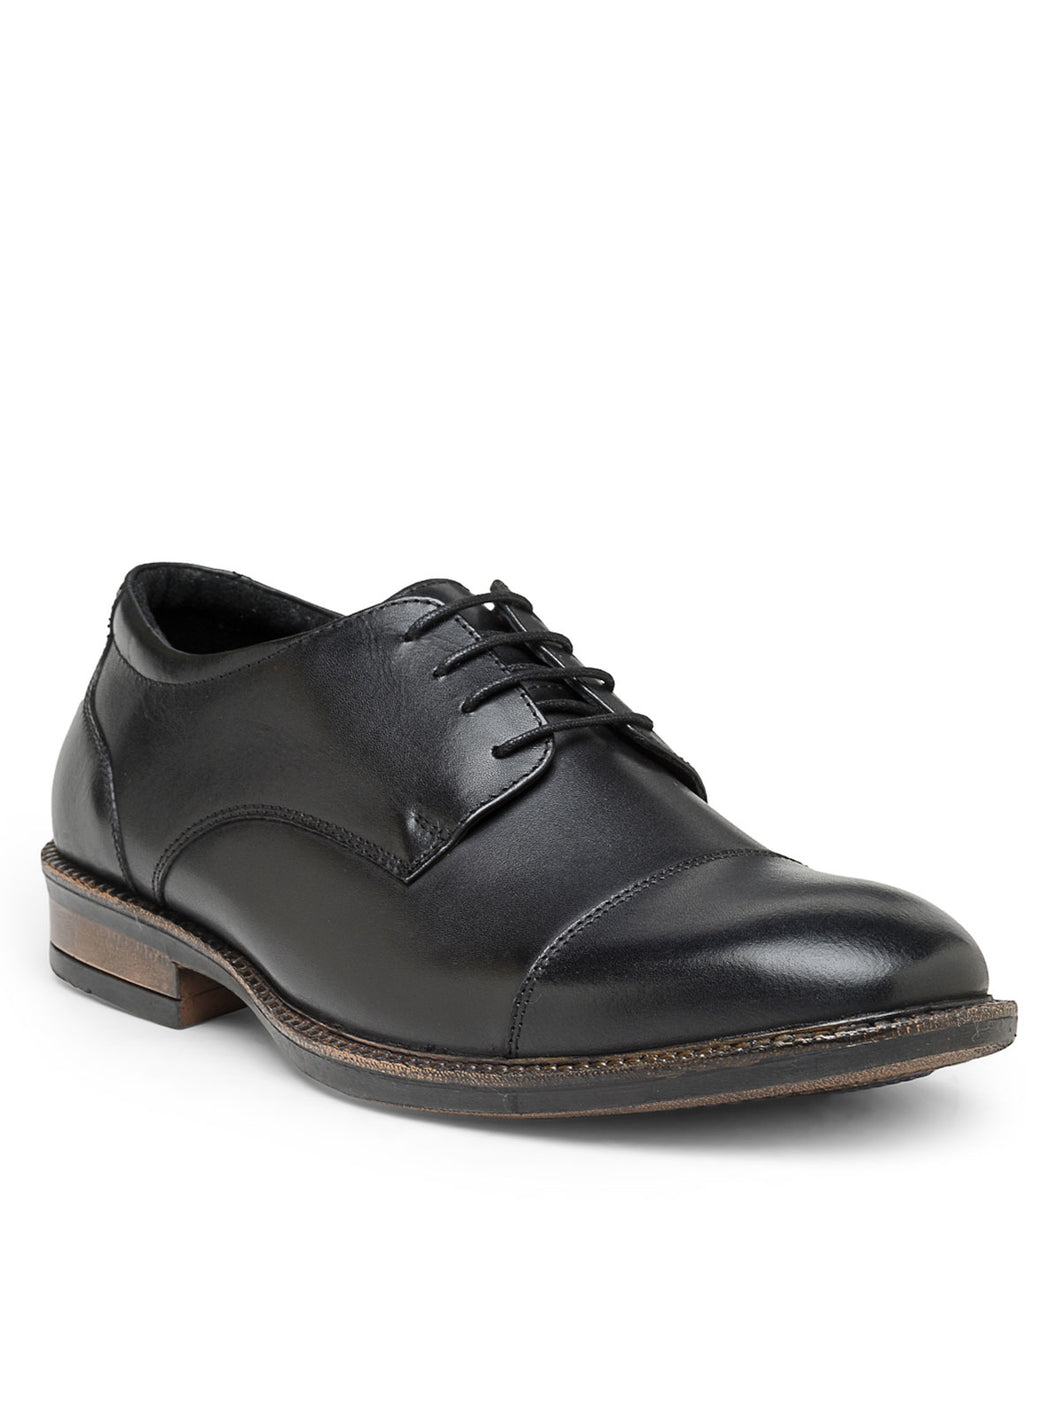 Teakwood Men's Real Leather Shoes